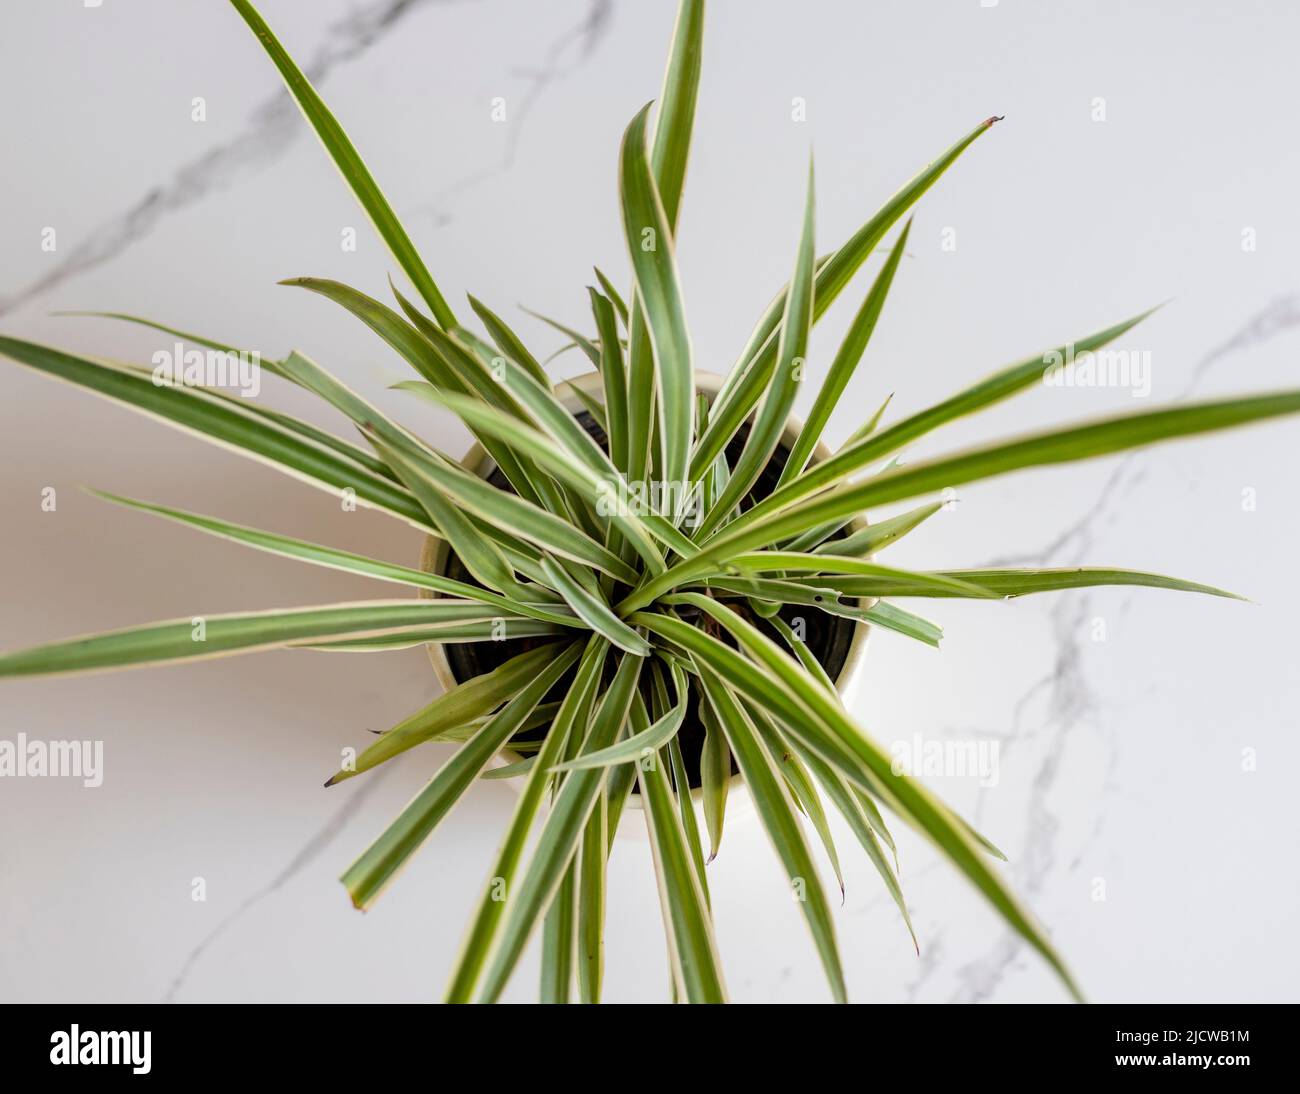 High angel view of Spider grass plant Stock Photo